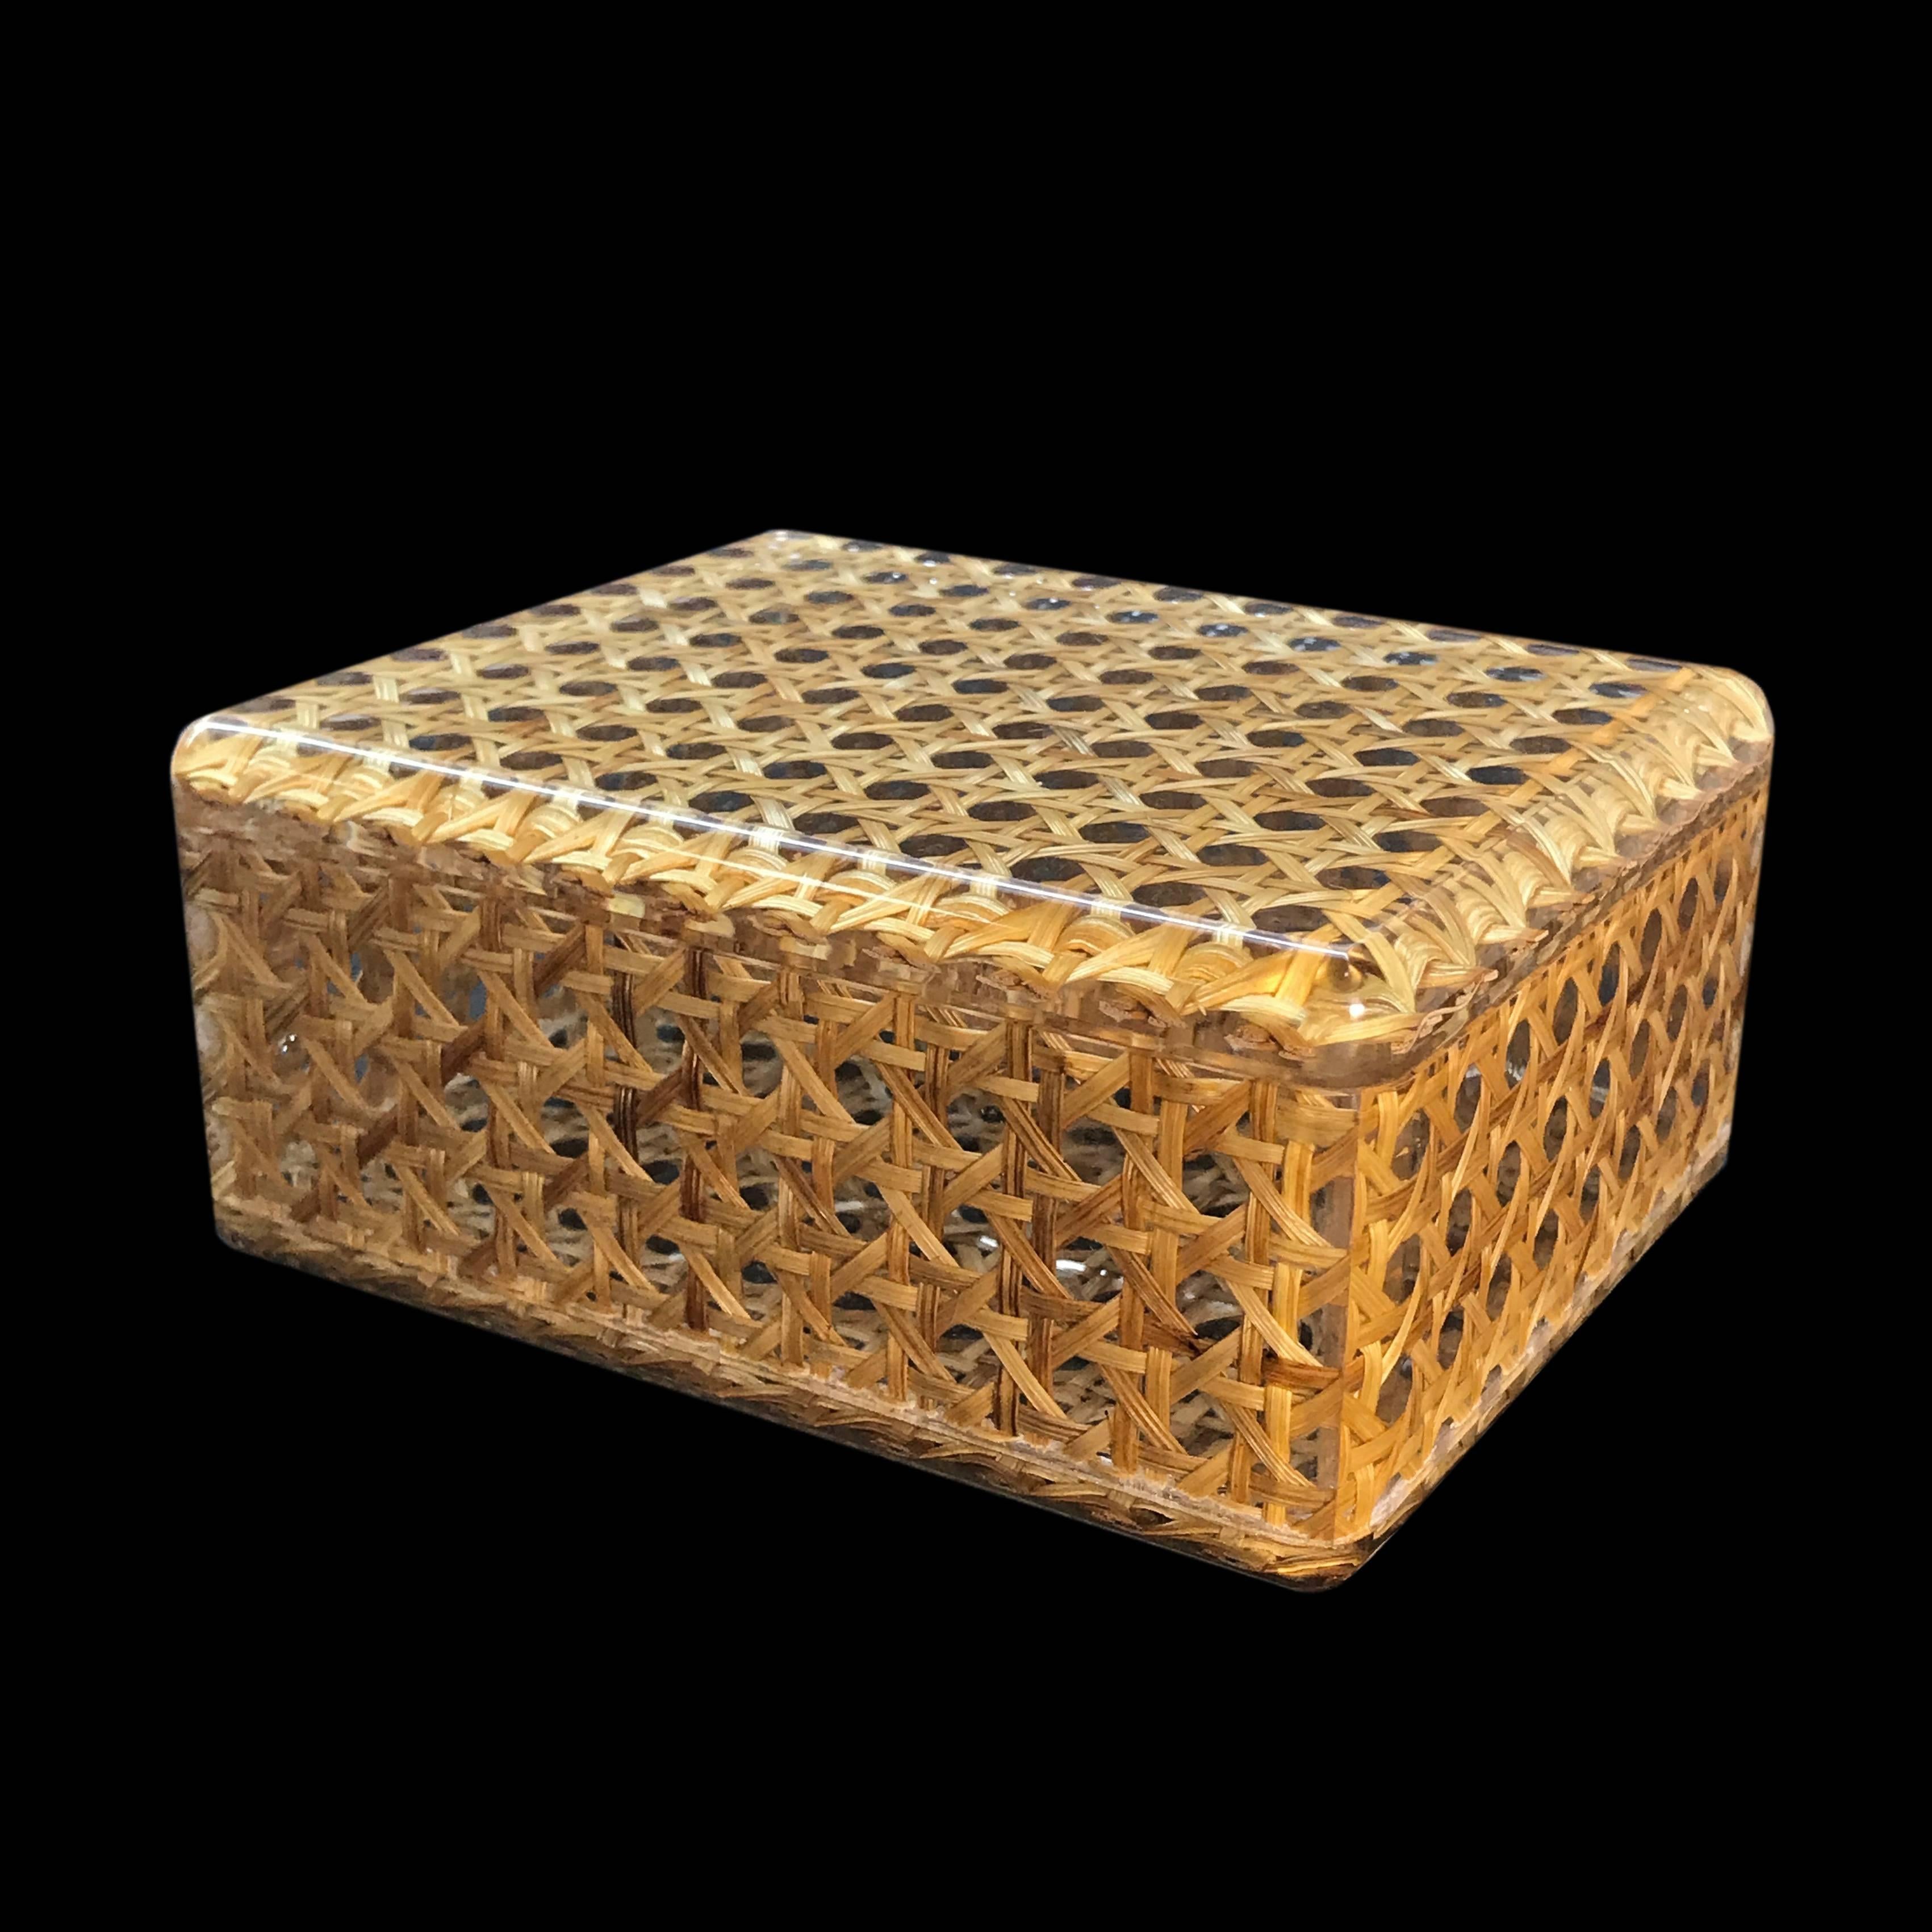 Midcentury Lucite and Vienna Straw Wicker Italian Box 1970s Christian Dior Style 5